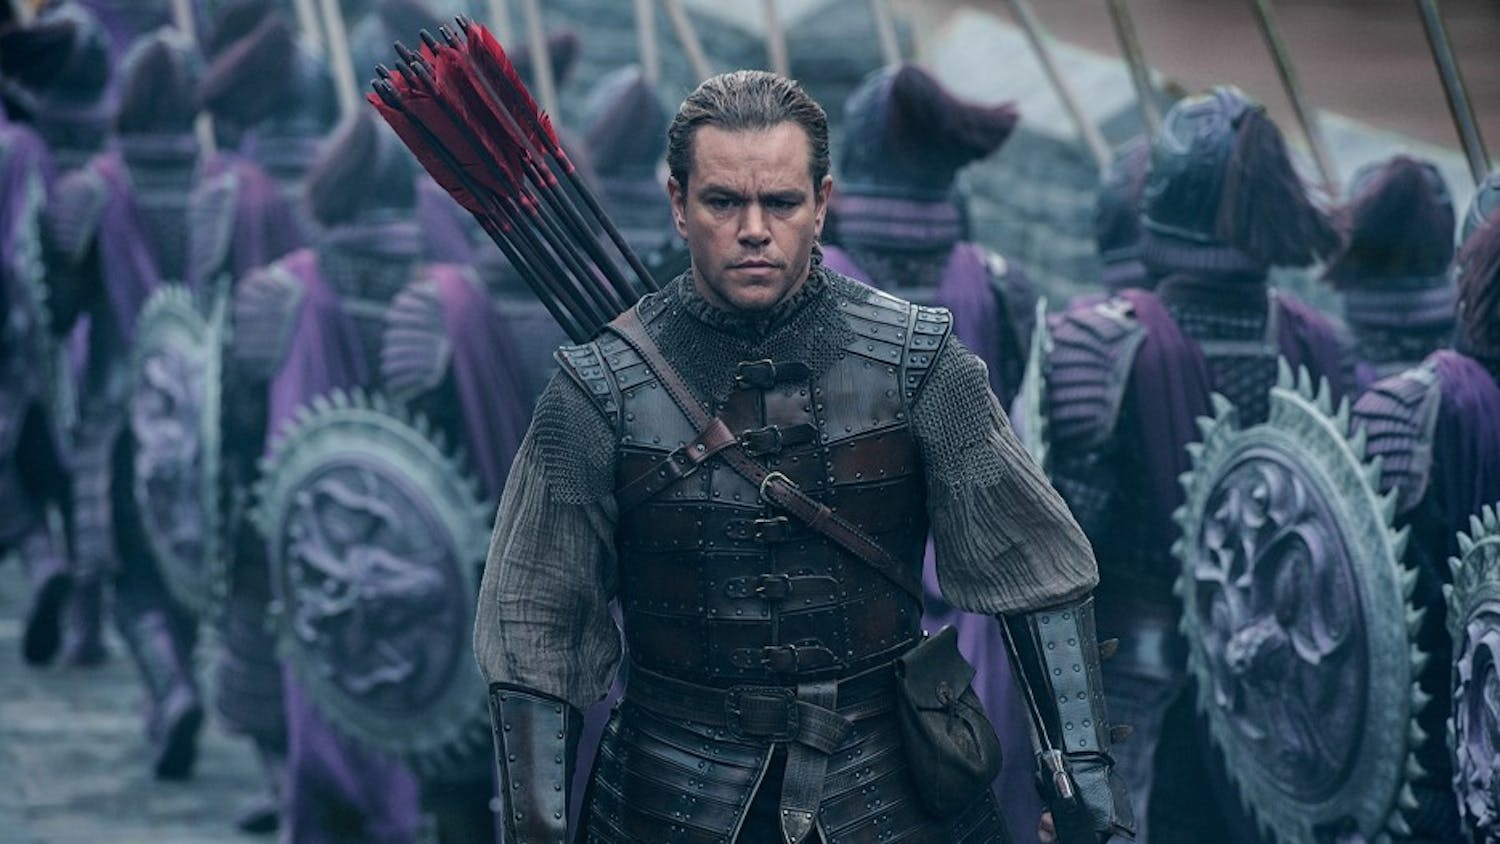 ENTER THEGREATWALL-MOVIE-REVIEW MCT